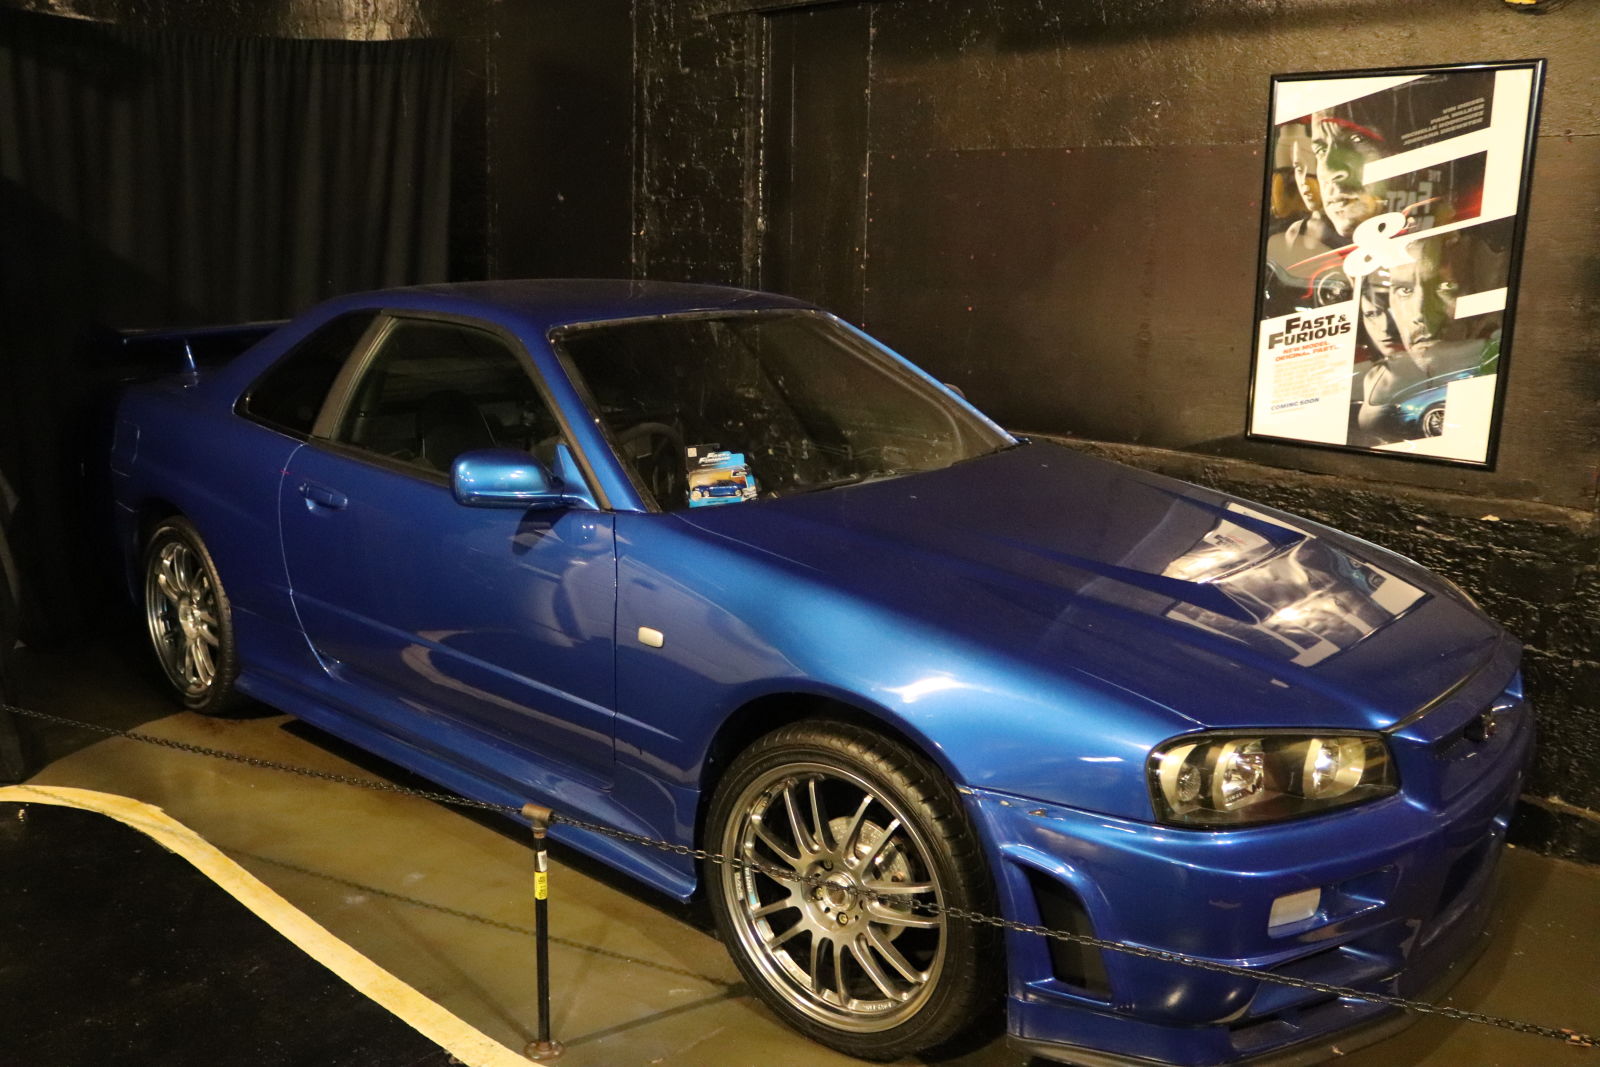  This R34 was used for stunts in the 4th Fast and Furious movie and apparently has a Volkswagen Jetta engine in it. 